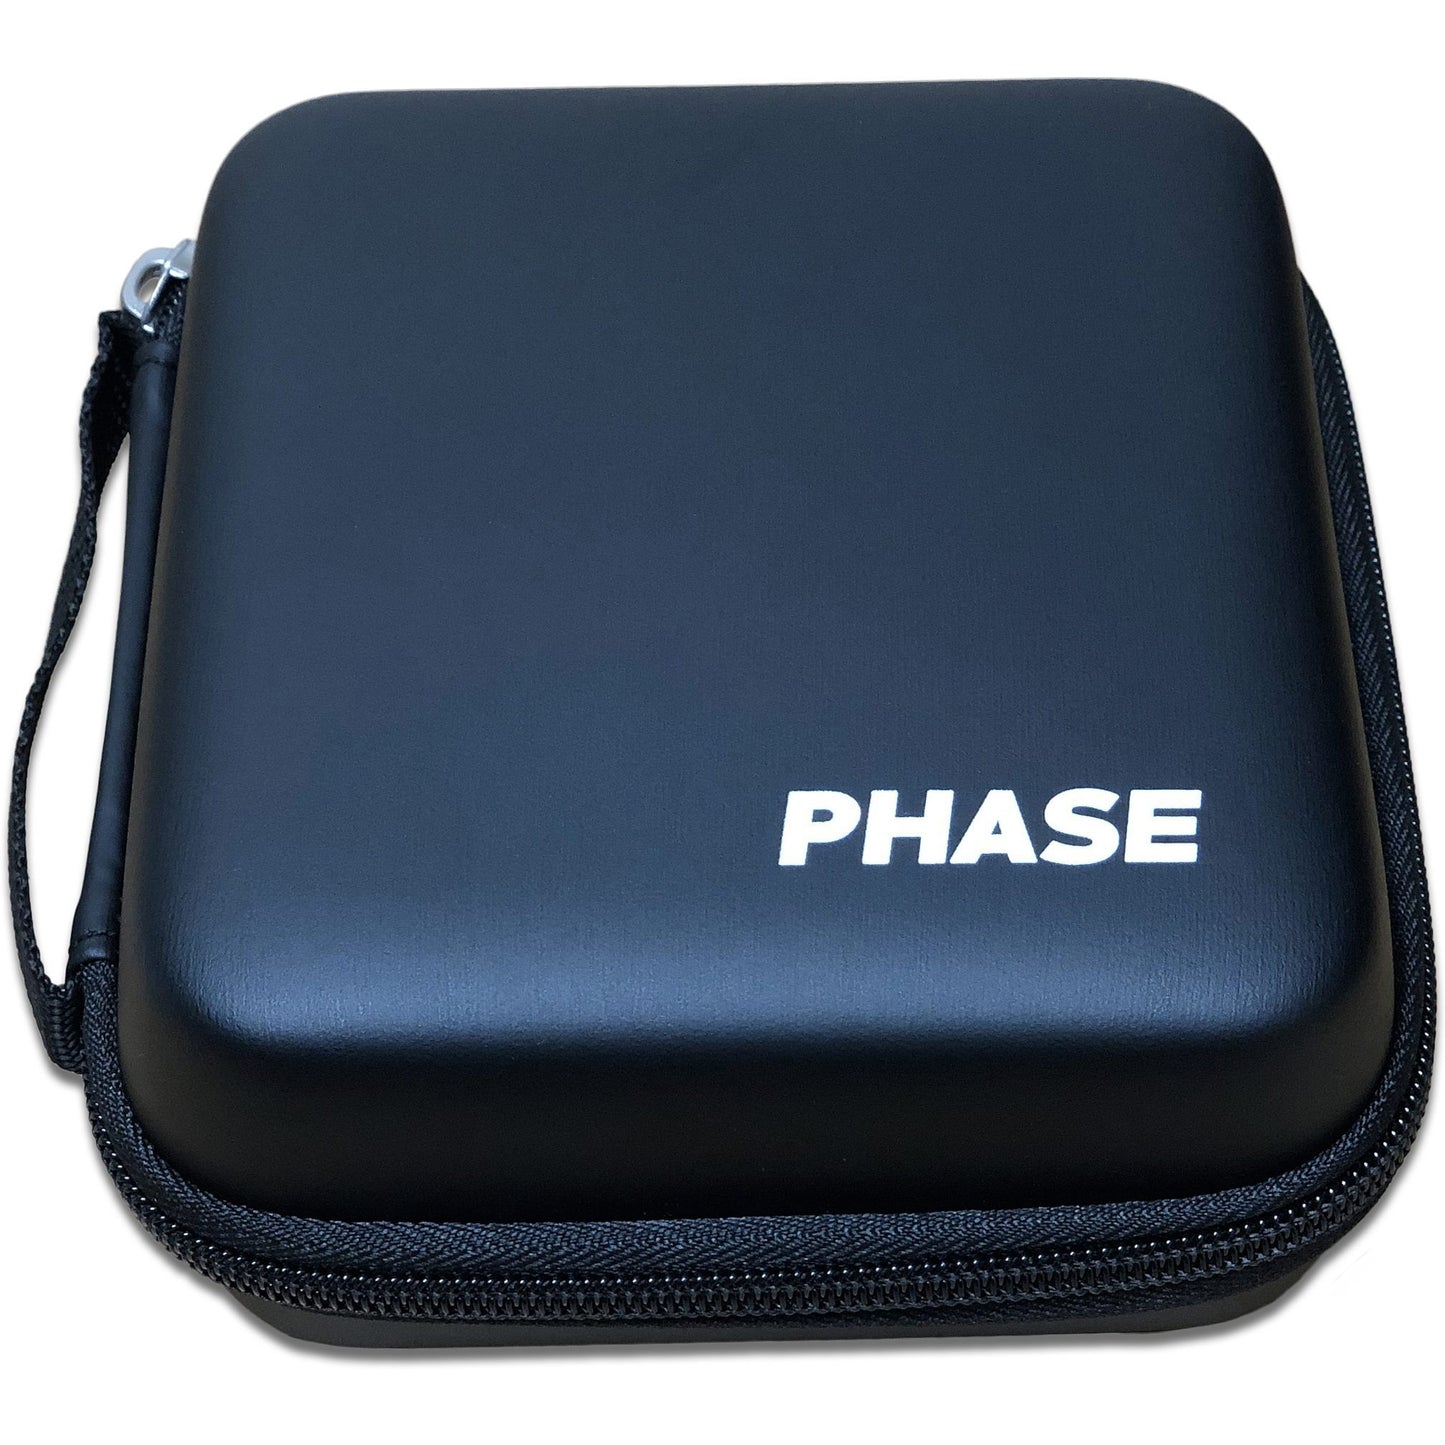 MWM Phase Case for Phase DJ Controllers